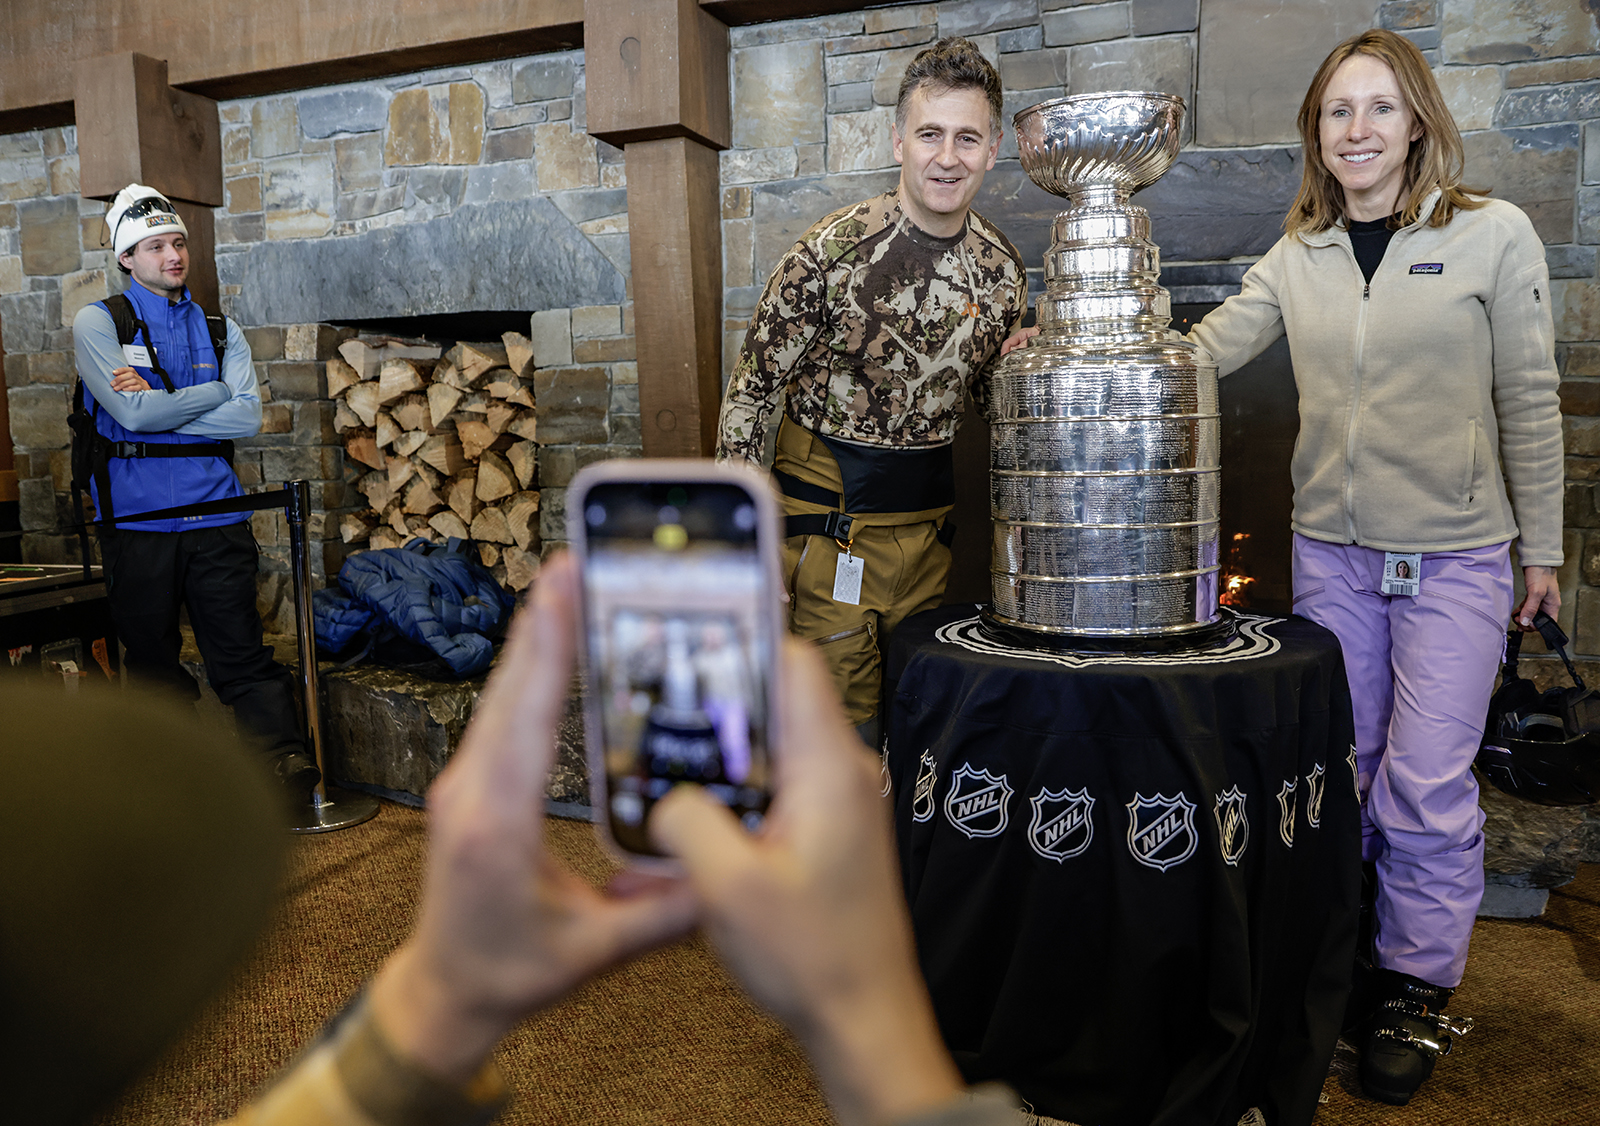 Stanley Cup makes rounds in Whitefish